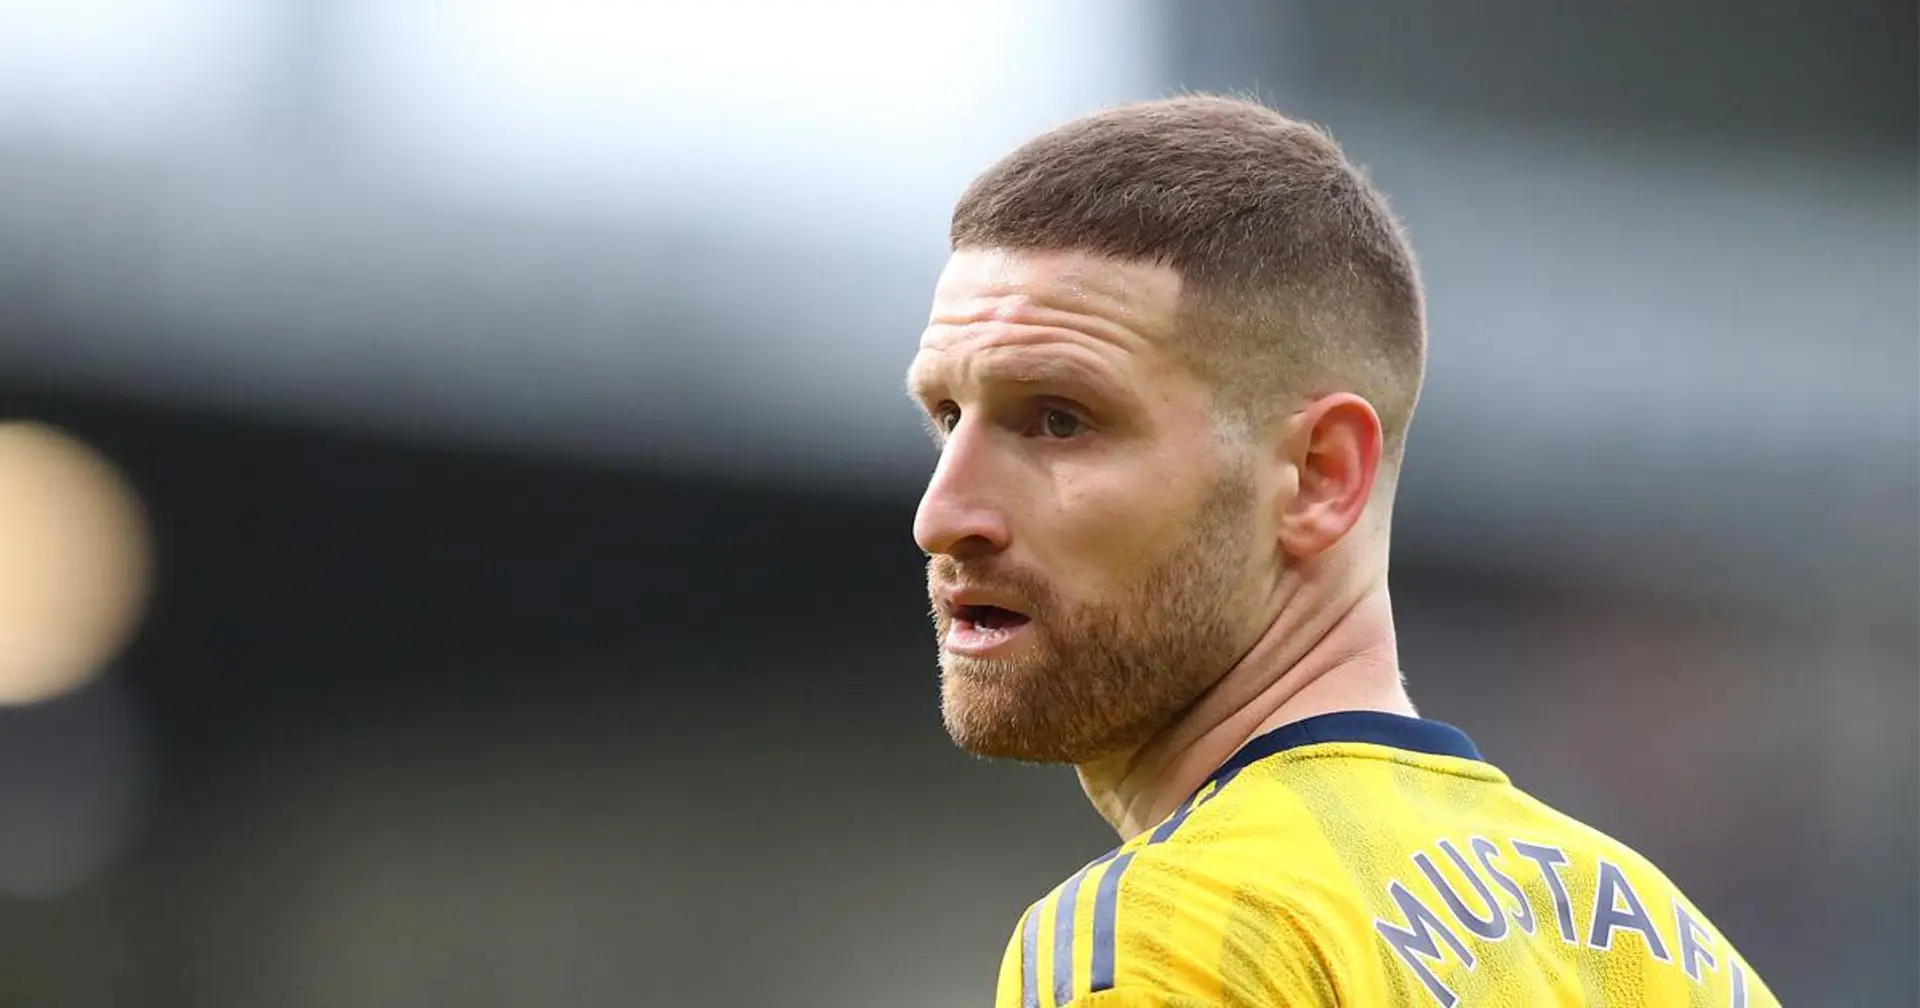 Mustafi's agent: 'No talks about contract termination with Arsenal'